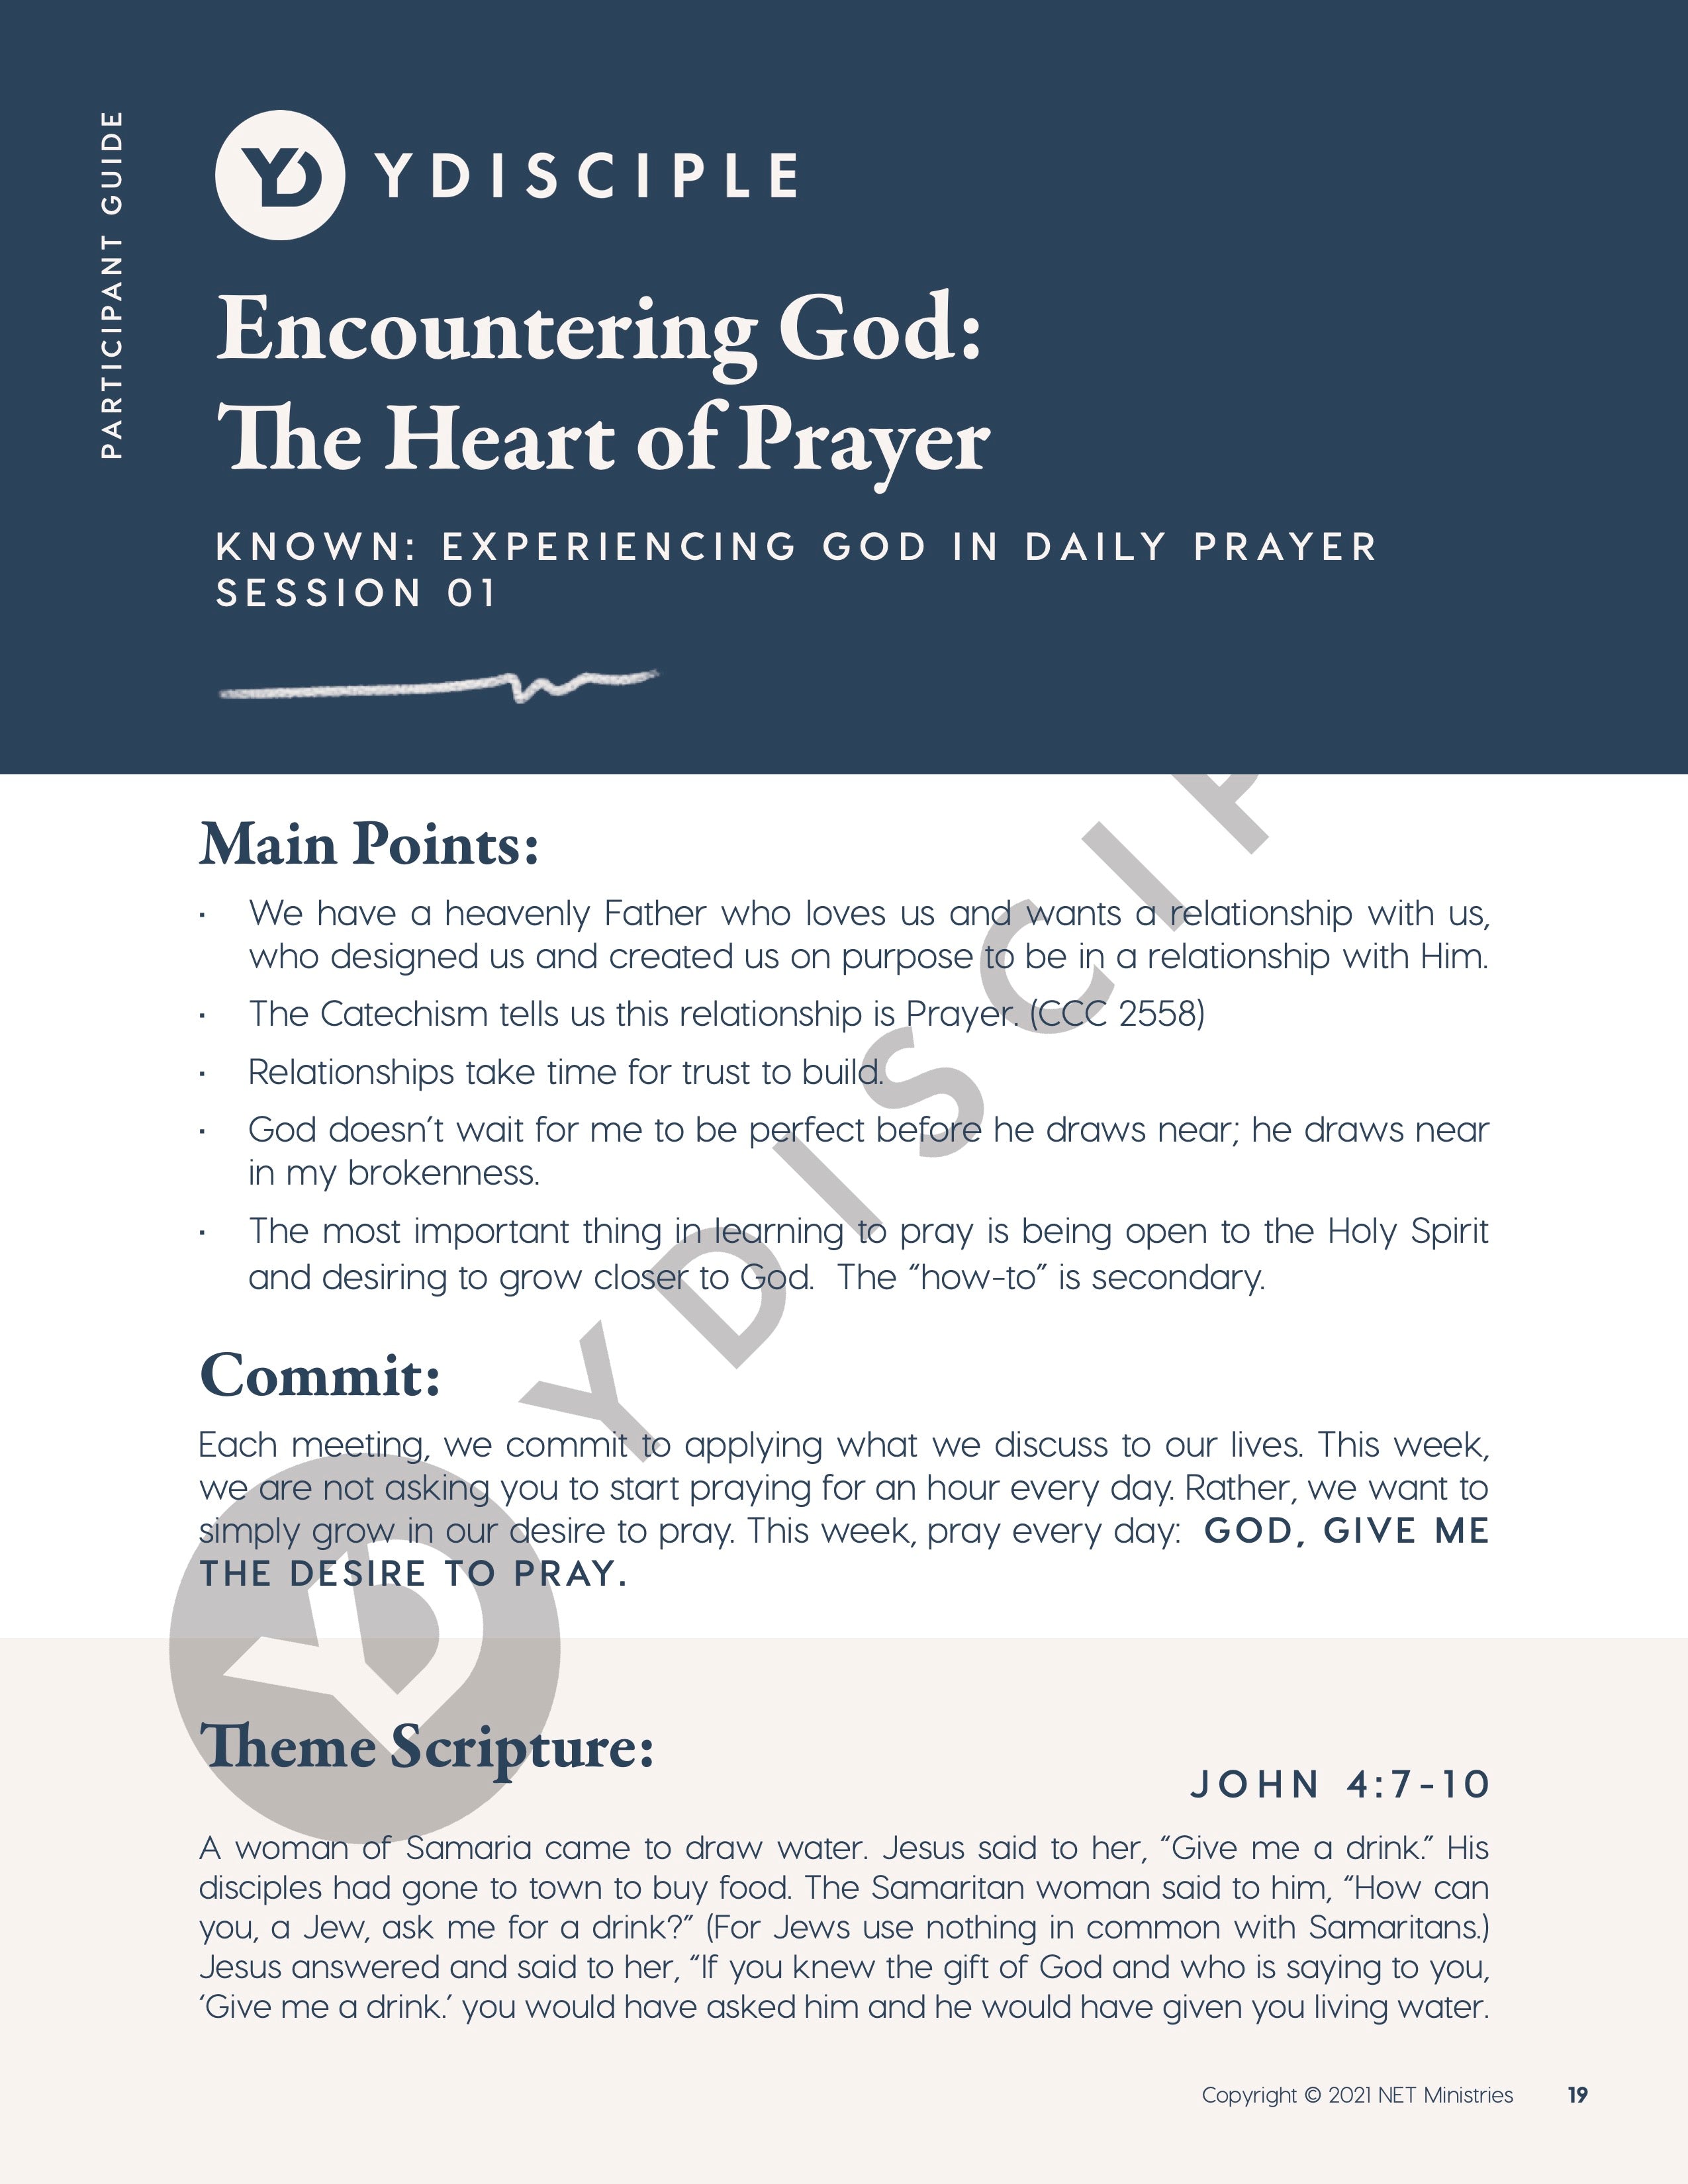 Known: Experiencing God in Daily Prayer - Extra Leader Guides